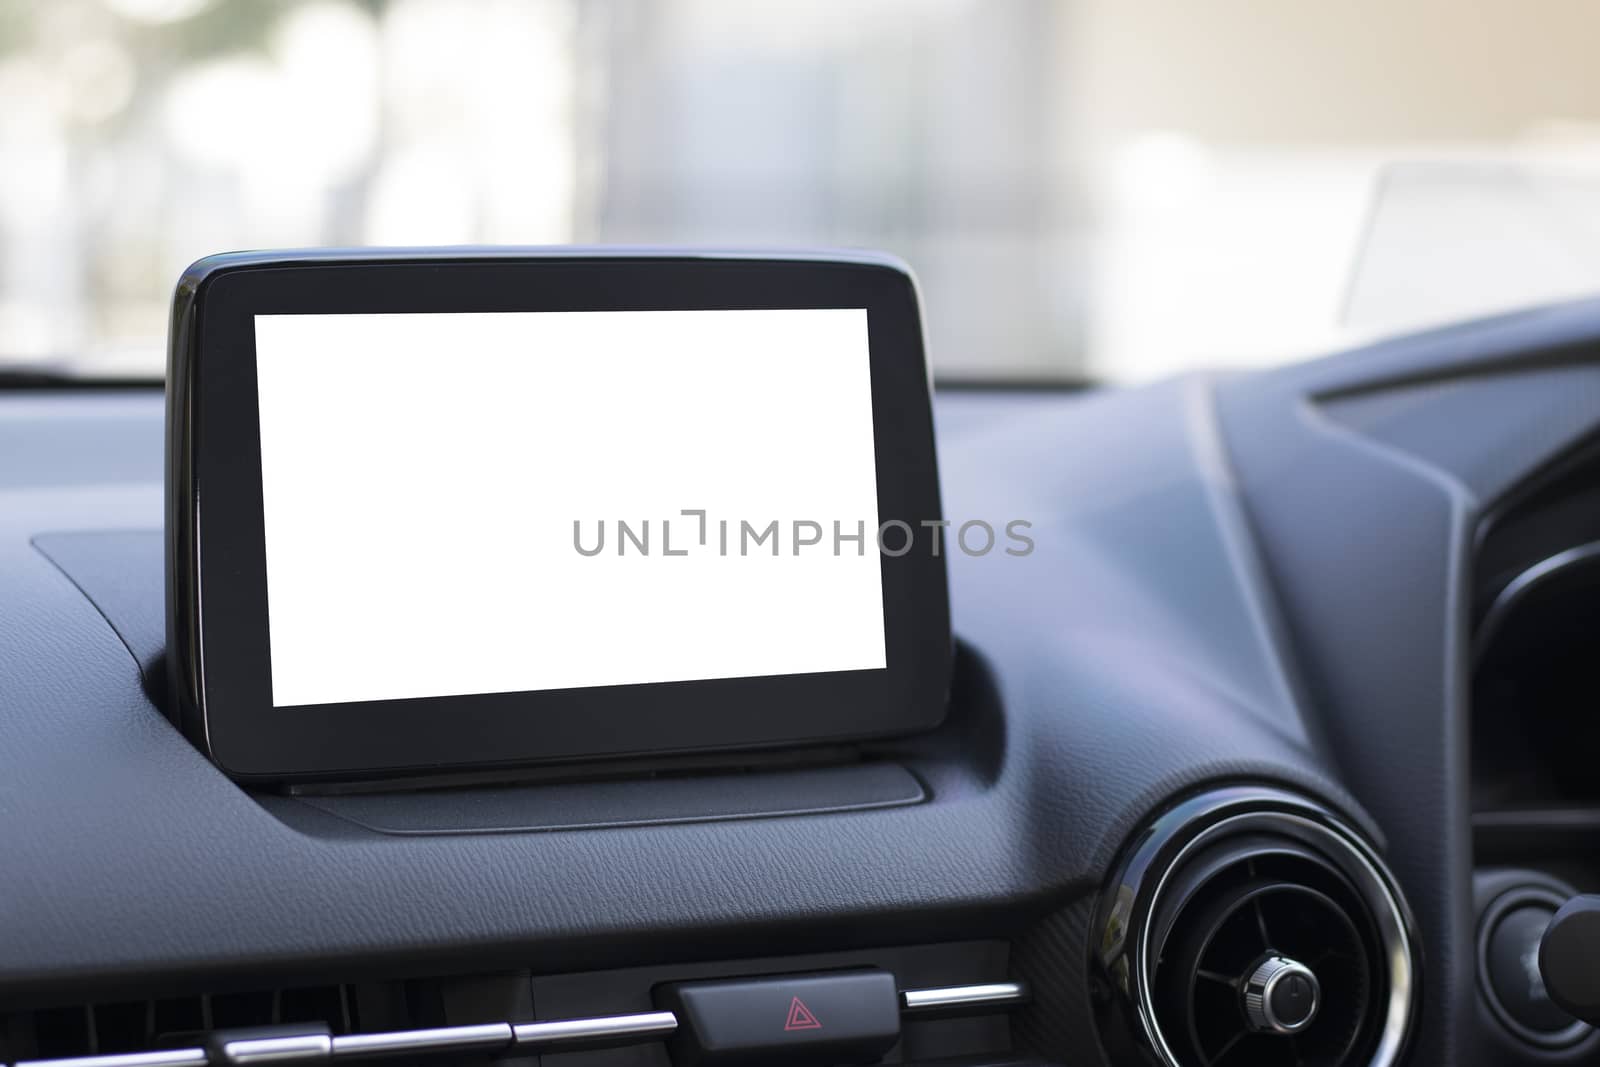 Touch screen monitor for using various applications such as entertainment,communications,navigation. Touch screen for operating various car applications.